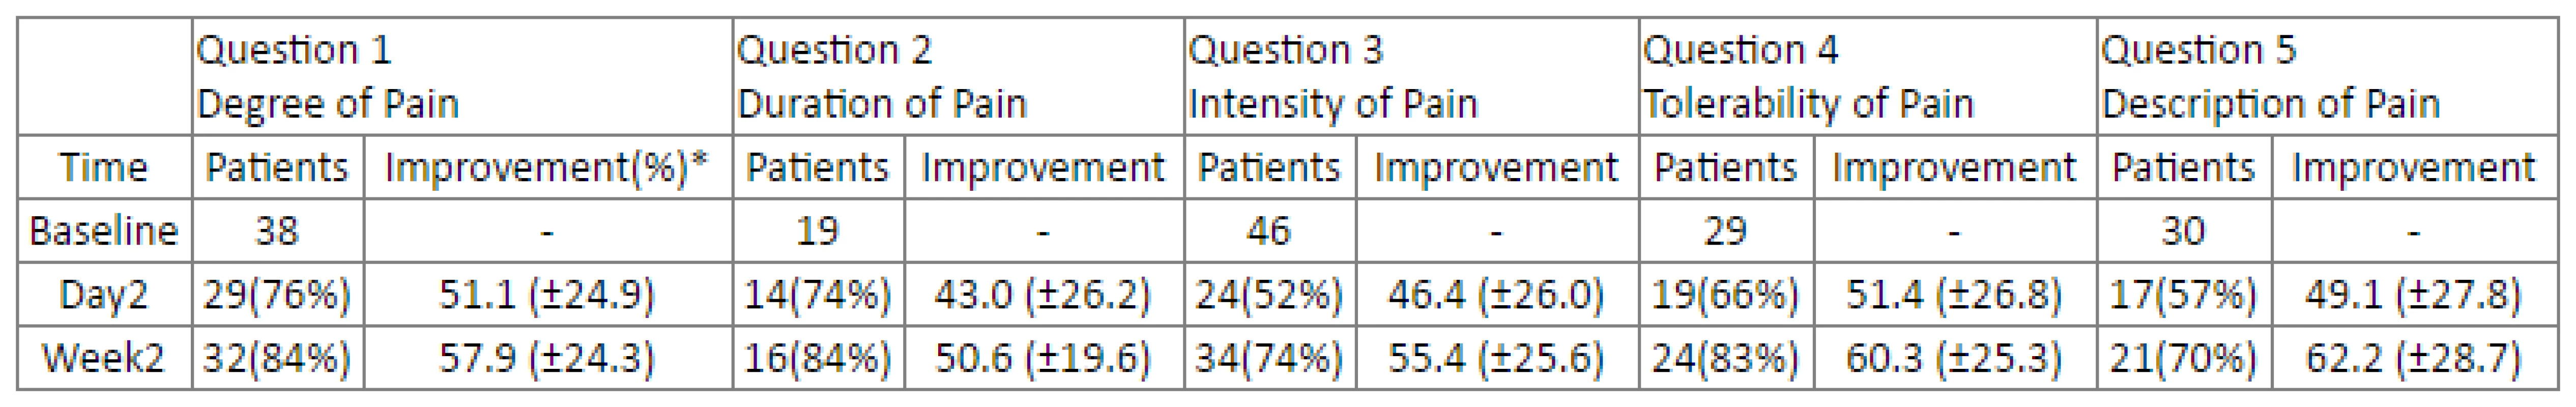 Number of patients that answered &gt;5 at Baseline and showed improvement (%) by at least 10% on the VAS according to question.